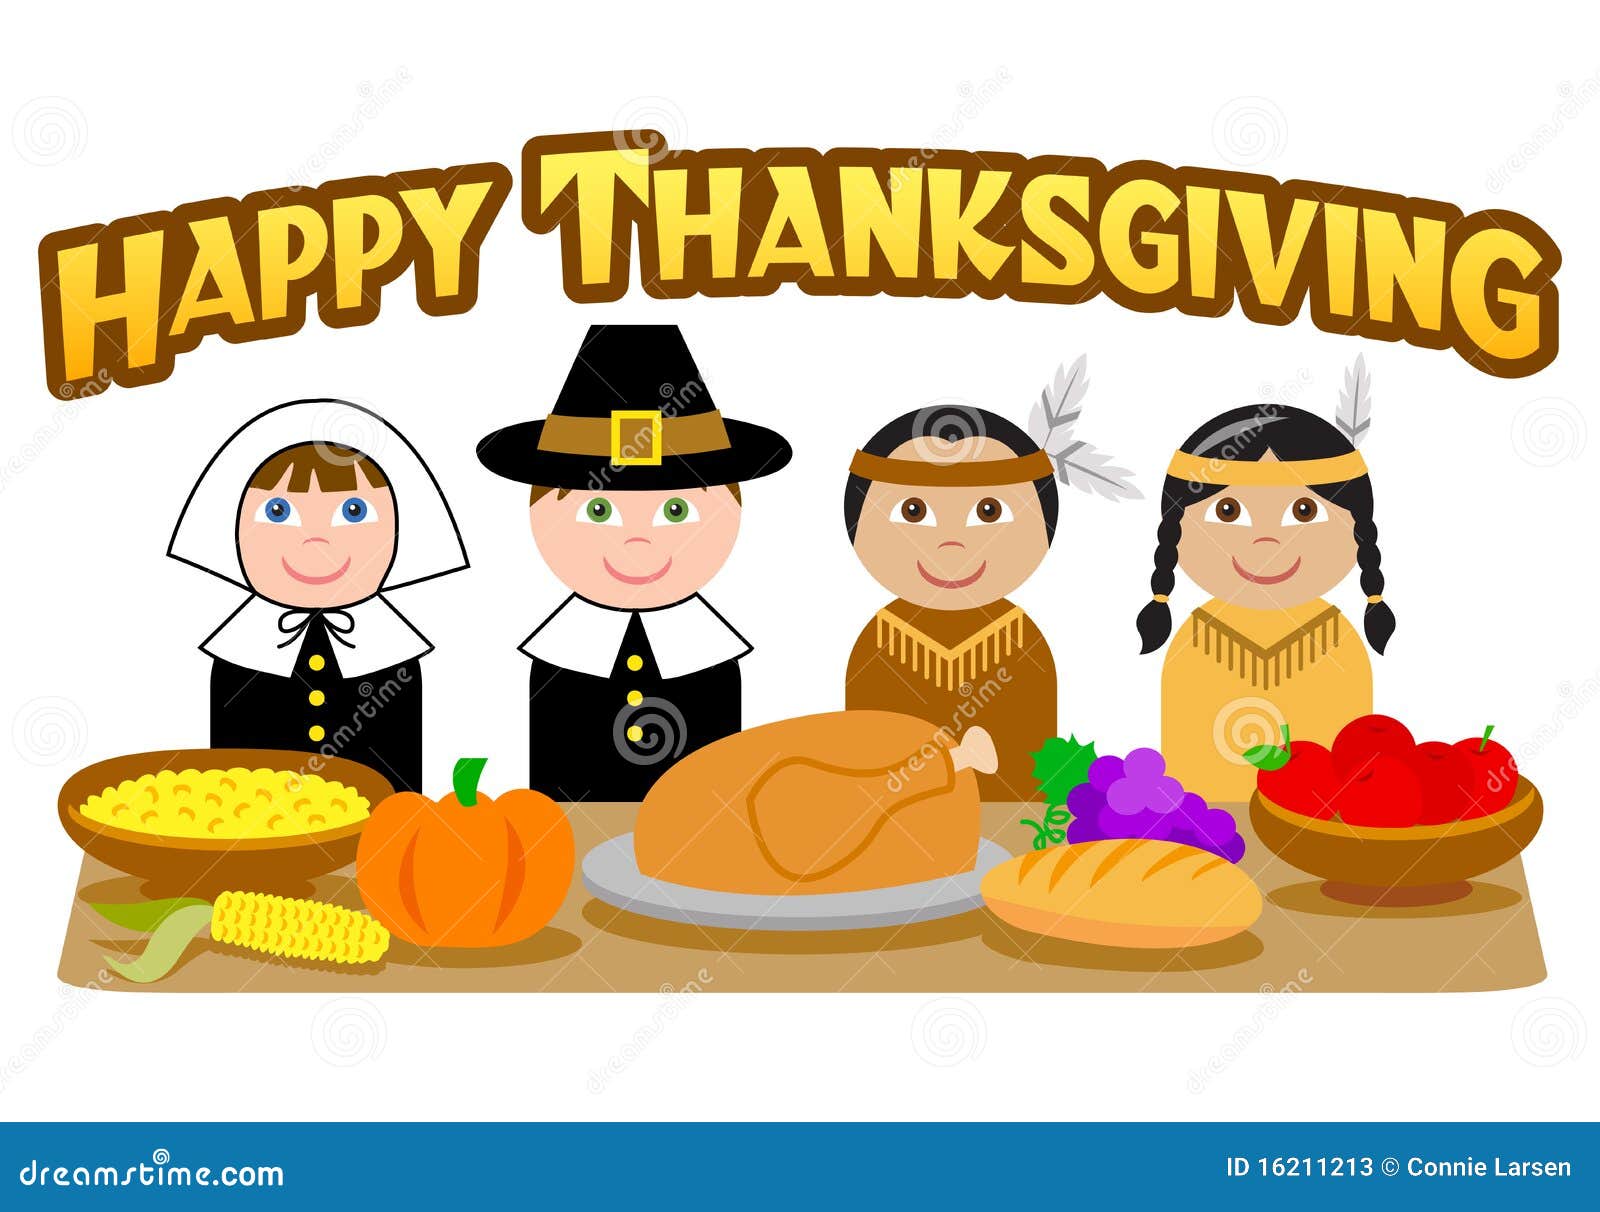 microsoft office clipart thanksgiving - photo #40